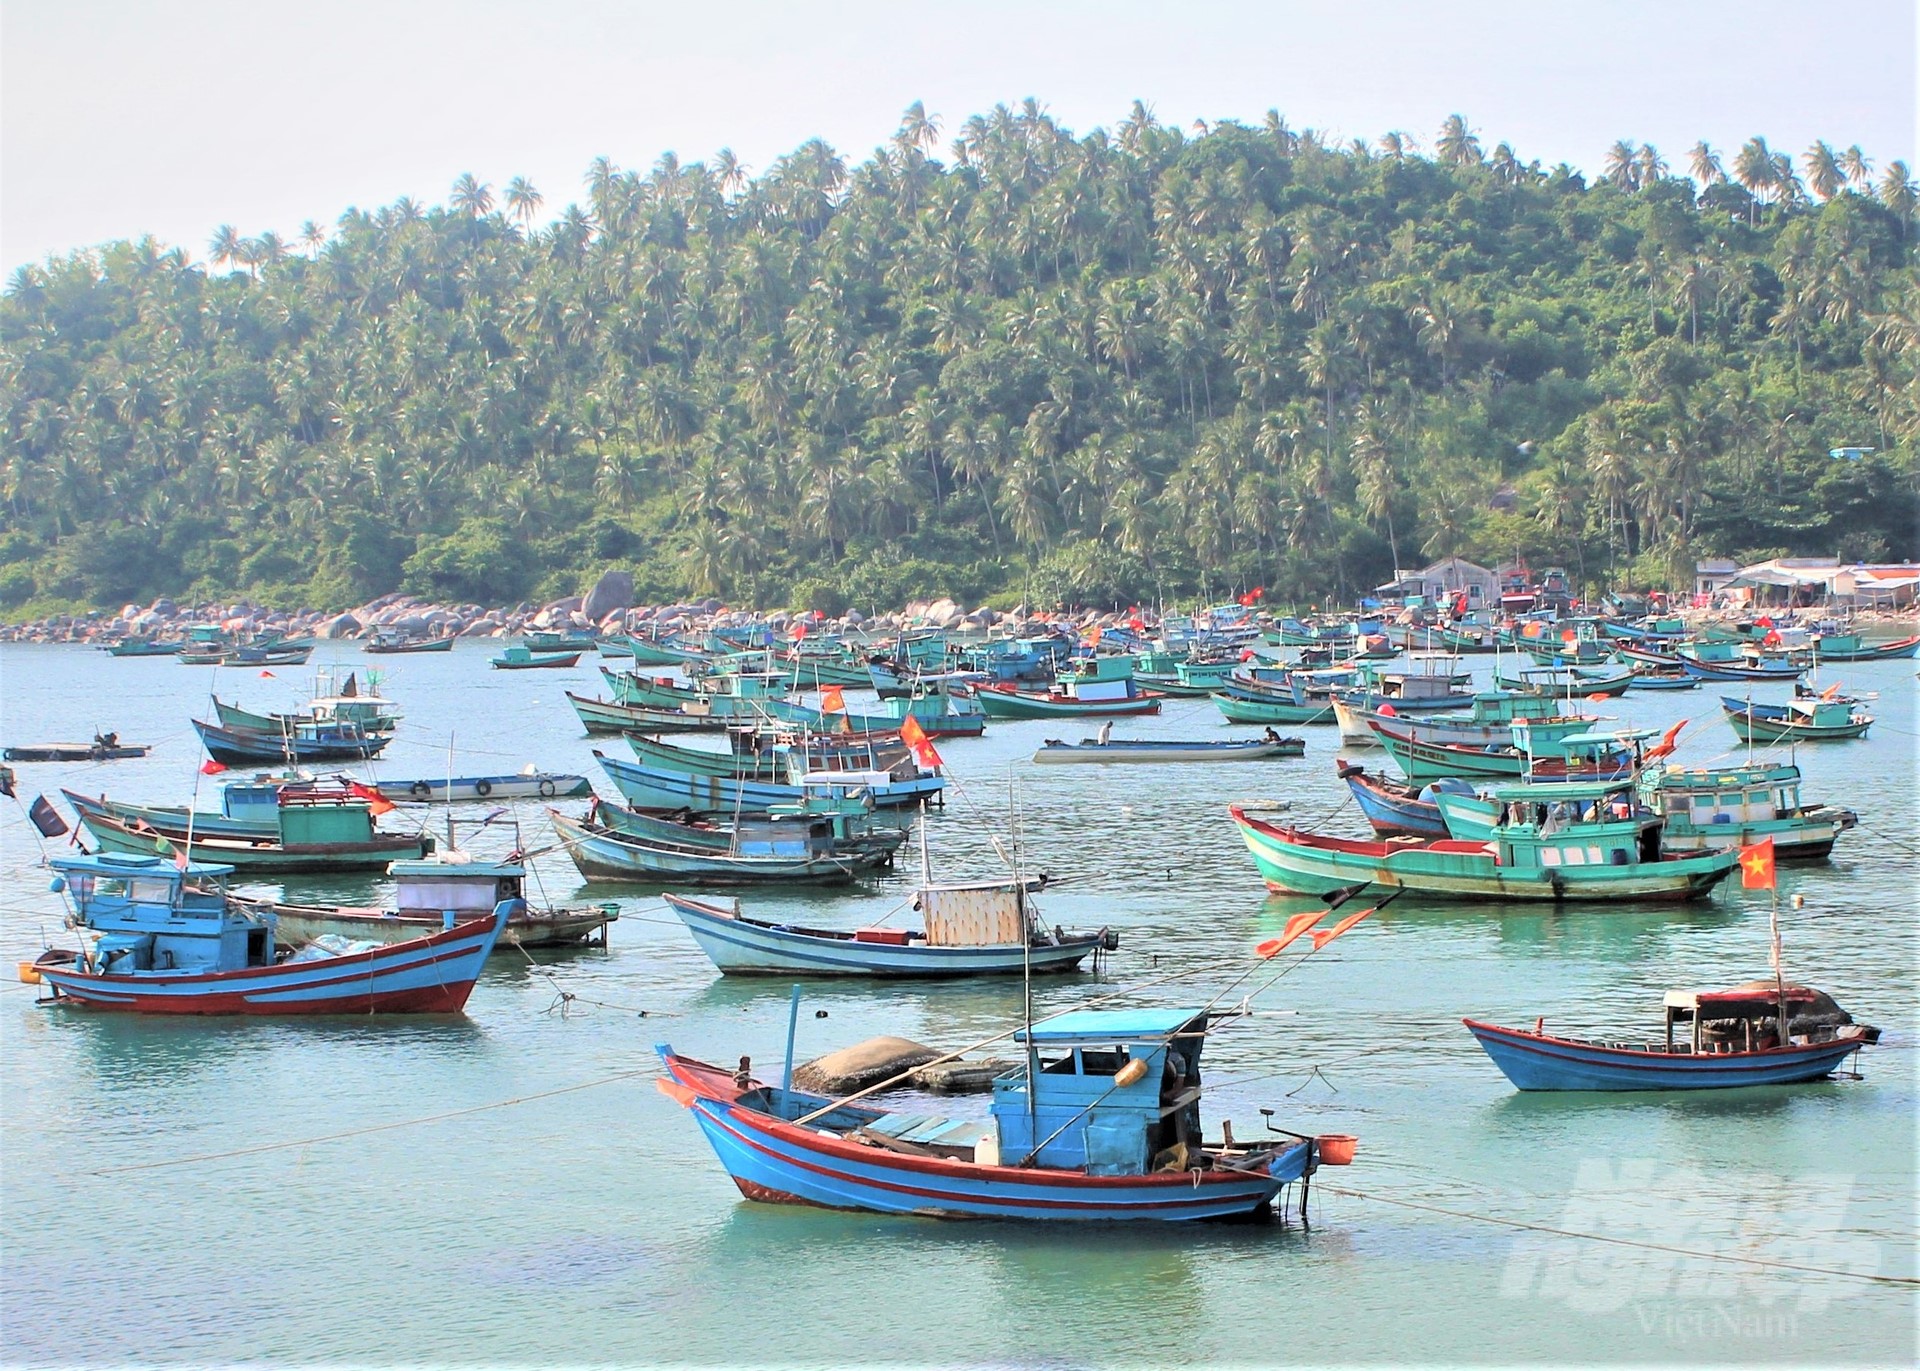 Through review and verification, by the end of April 2023, Kien Giang province had 1,006 fishing vessels with the expiration of Fishing Vessel Technical Safety Certificate and Fishing License for over two years. The fishing vessels belong to the category of 'missing' and will be deregistered. Photo: Trung Chanh.